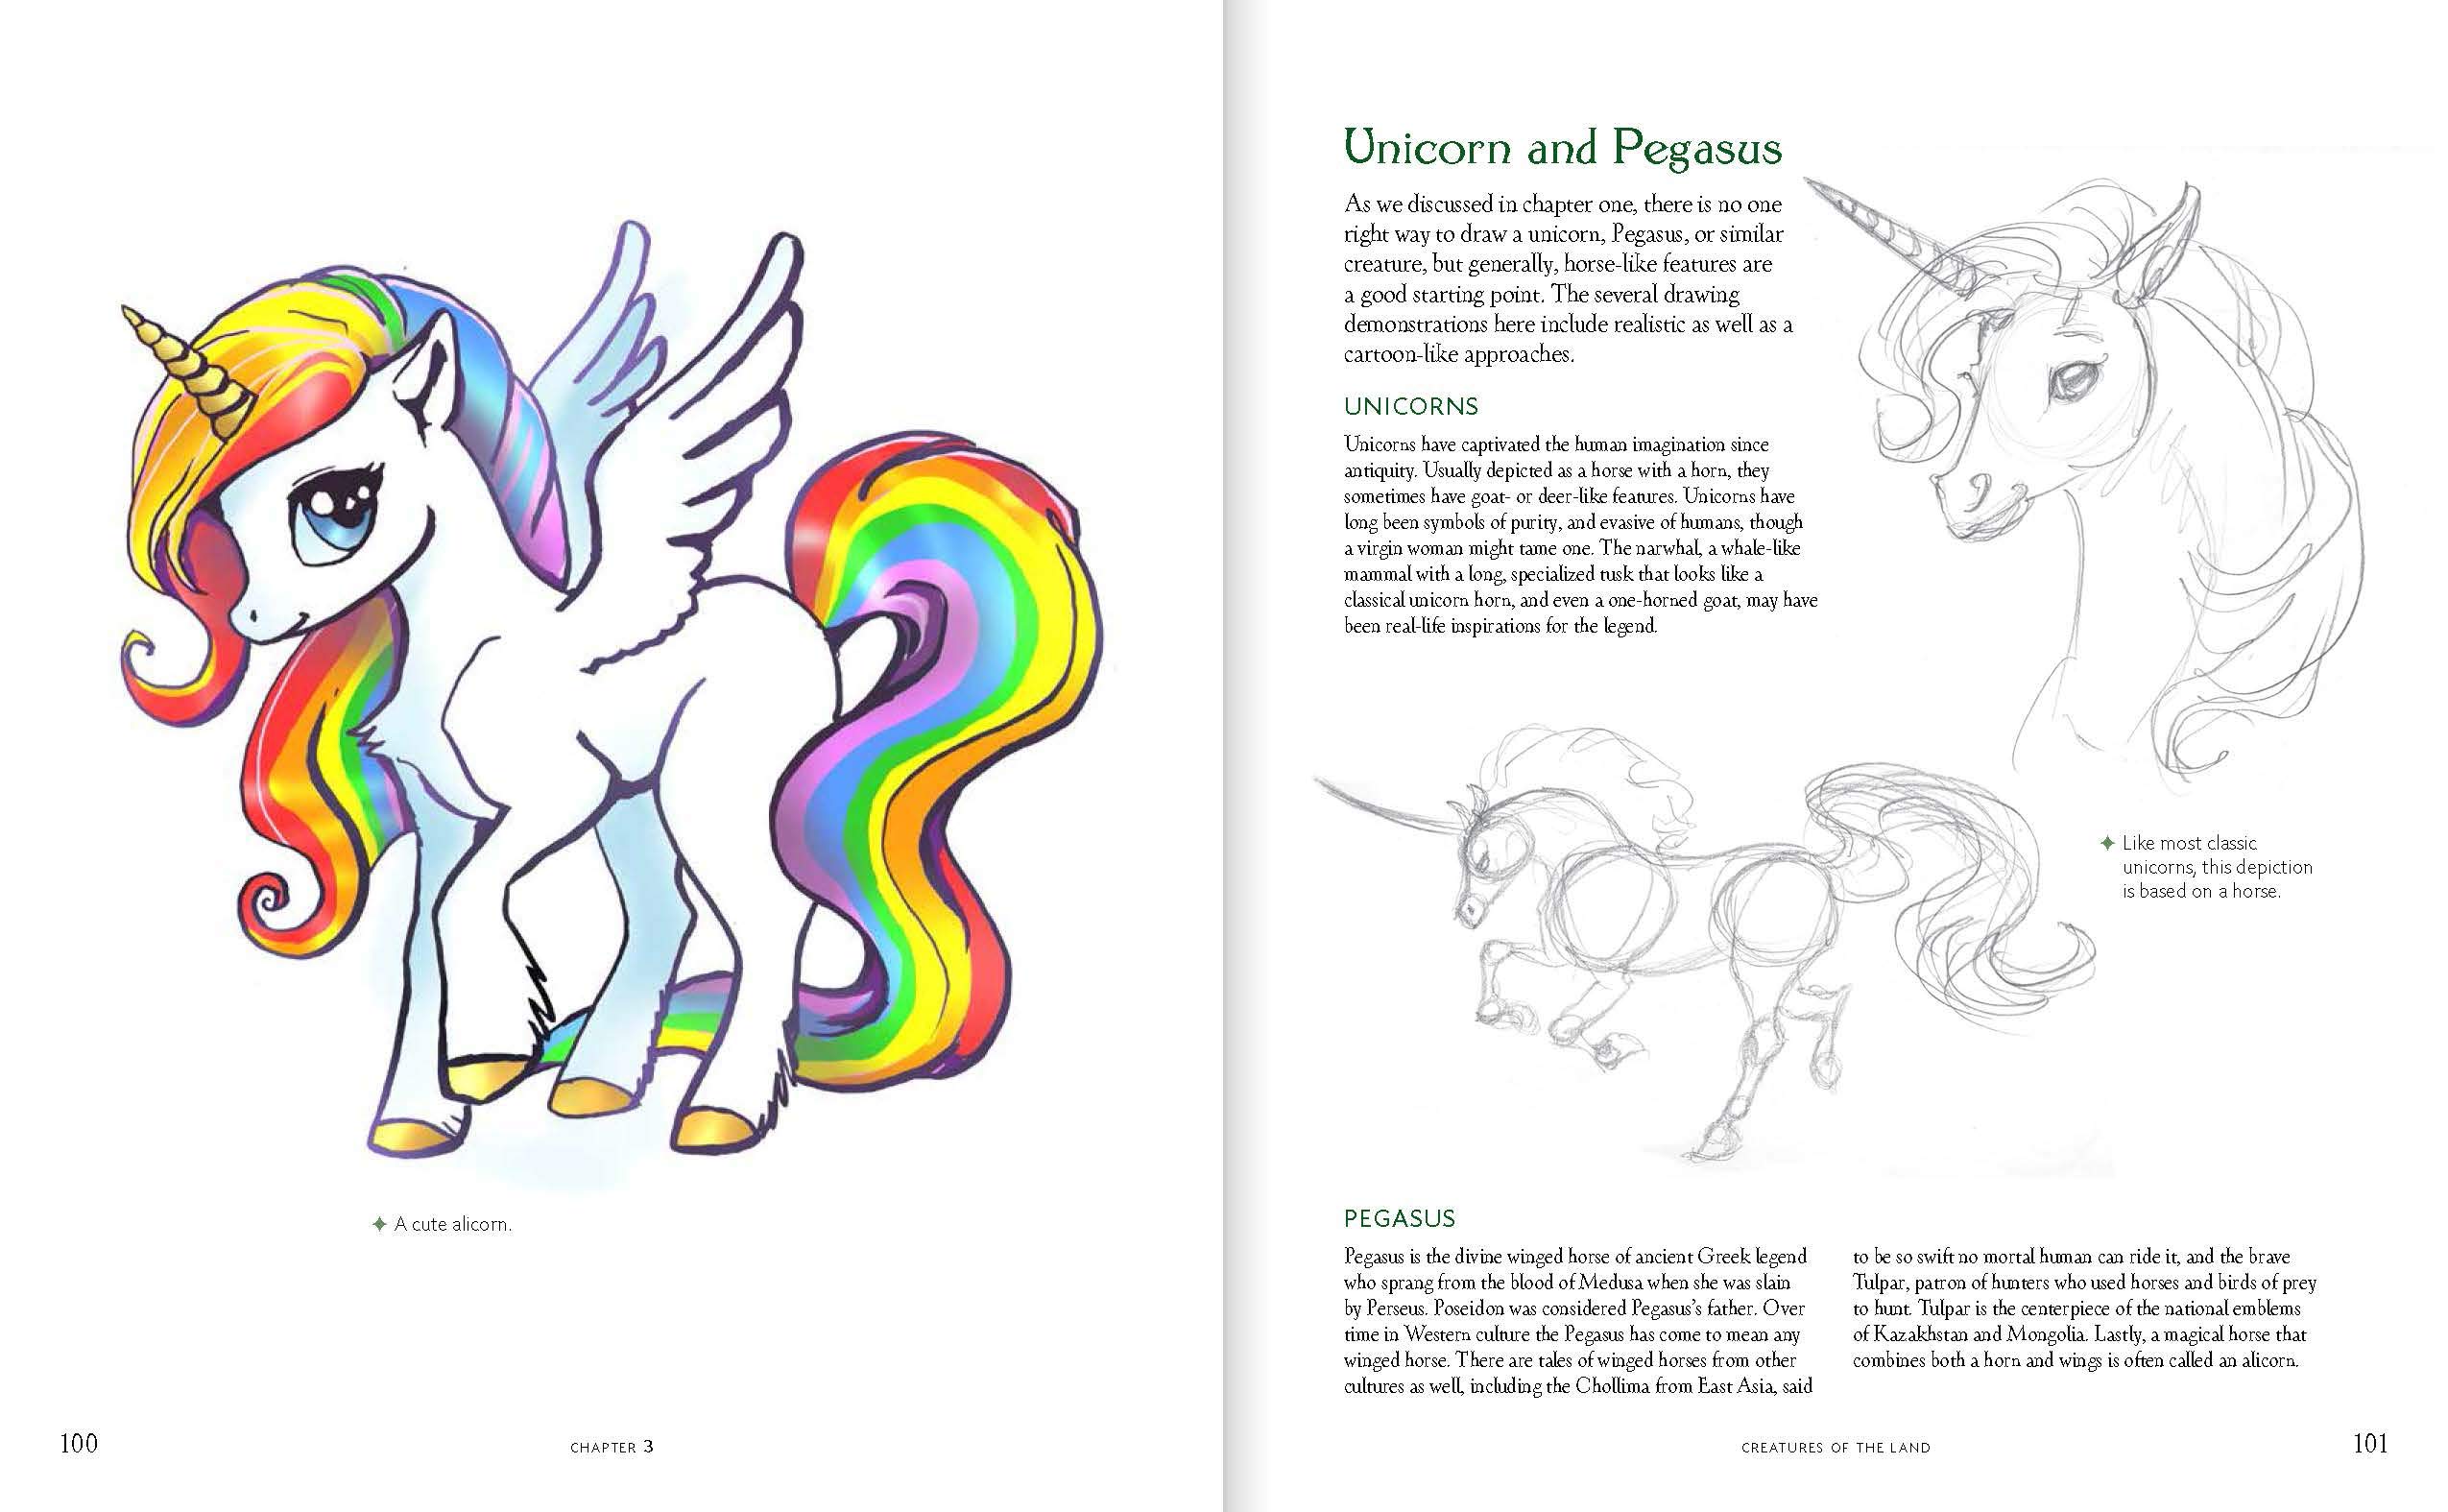 How To Draw A Unicorn With Wings Step By Step For Beginners How to